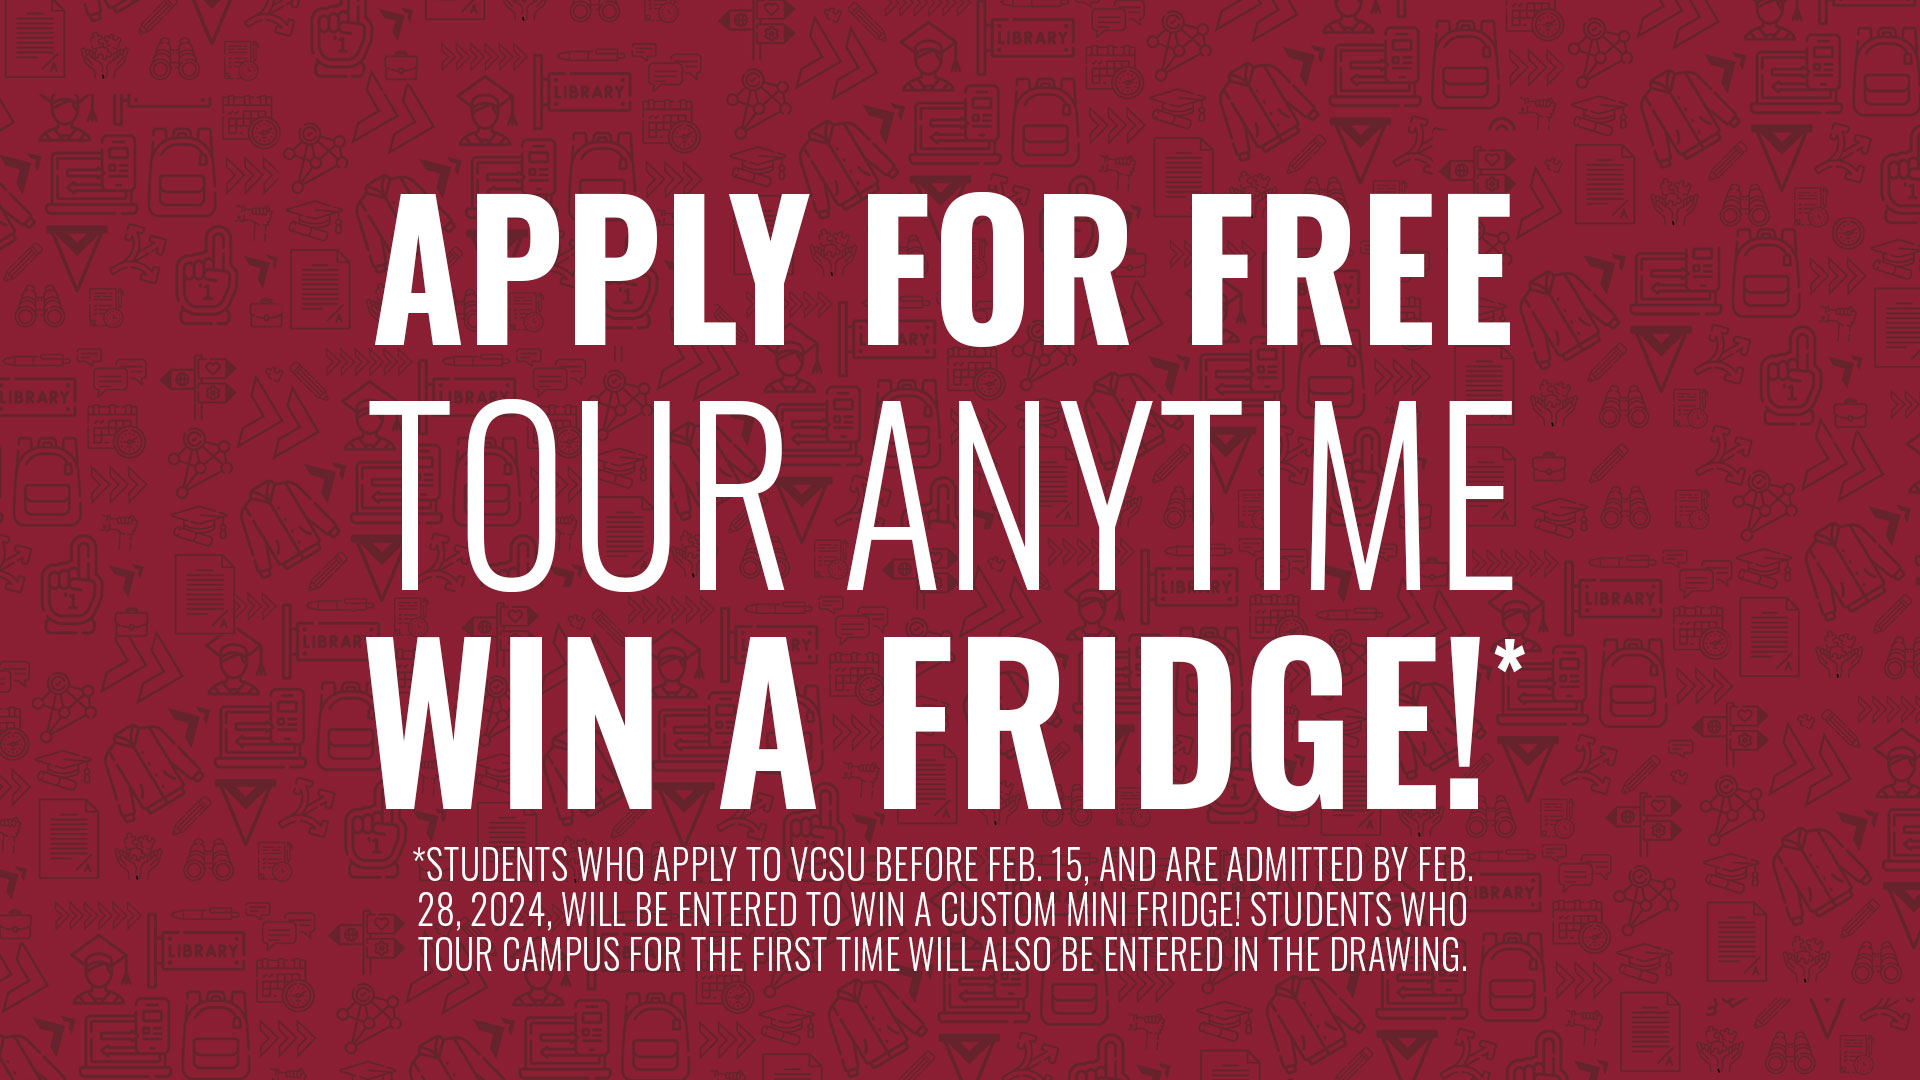 Apply for free. Tour Anytime. Win a fridge. *STUDENTS WHO APPLY TO VCSU BEFORE FEB. 15, AND ARE ADMITTED BY FEB. 28, 2024, WILL BE ENTERED TO WIN A CUSTOM MINI FRIDGE! STUDENTS WHO TOUR CAMPUS FOR THE FIRST TIME WILL ALSO BE ENTERED IN THE DRAWING.